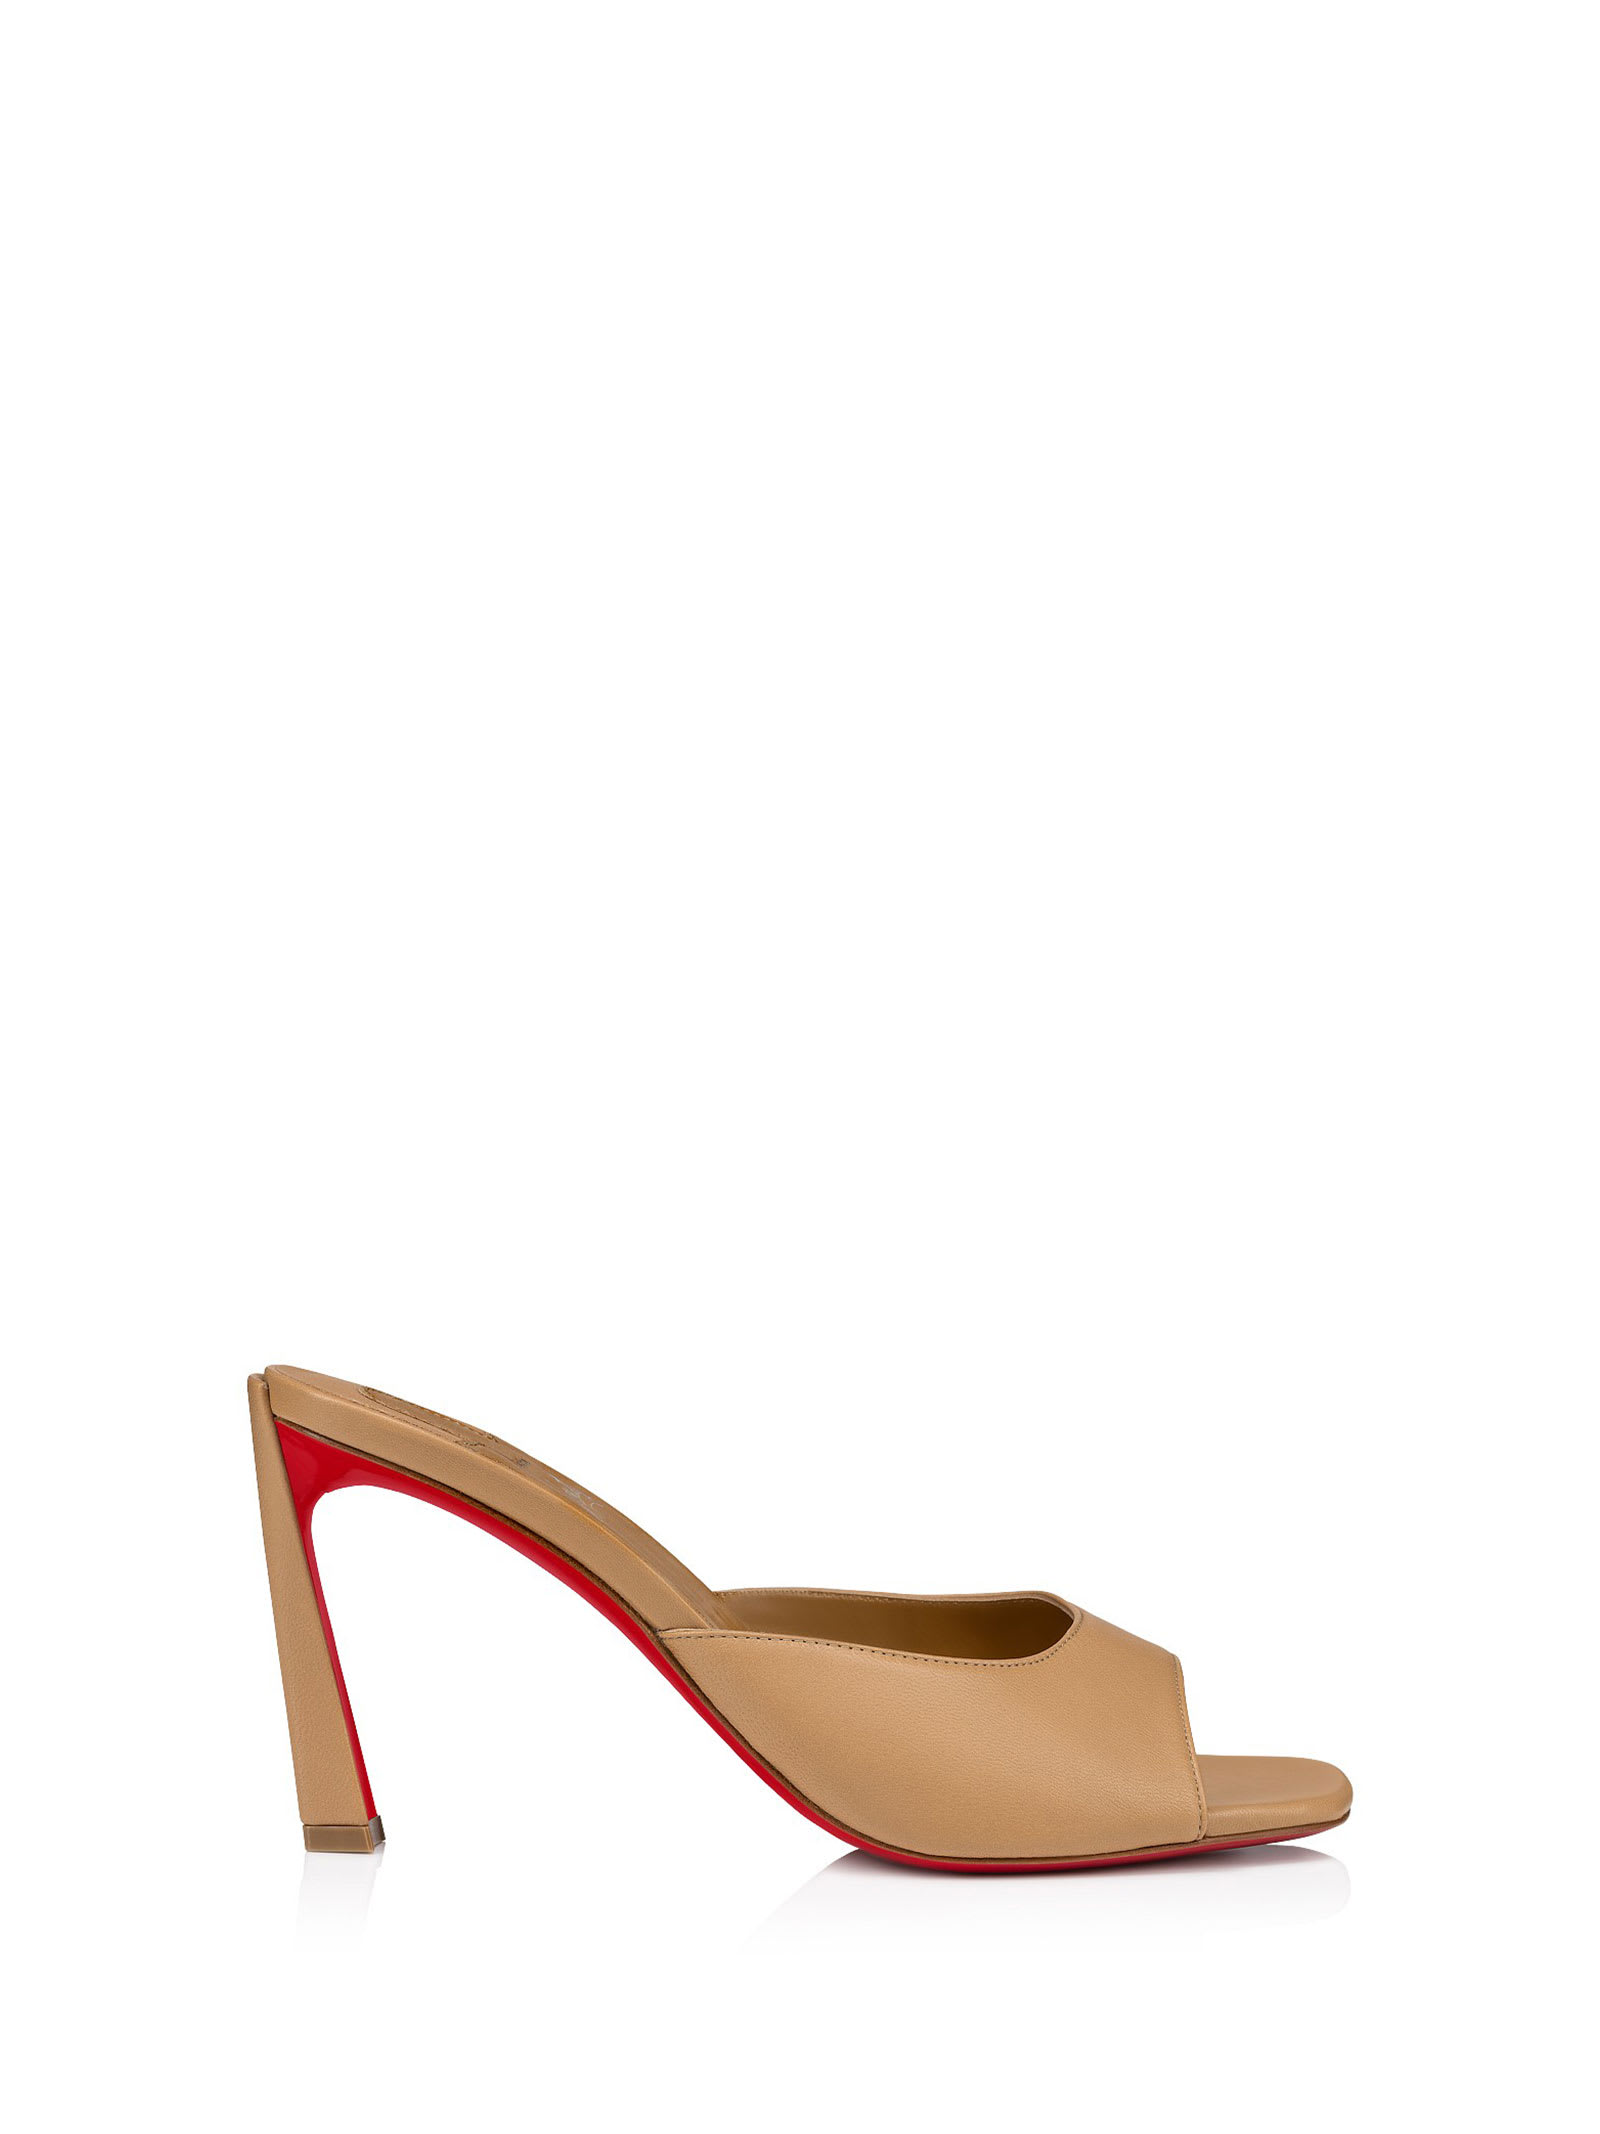 Shop Christian Louboutin Mules Condora In Brown Leather With Heel In Toffee Lin Toffee